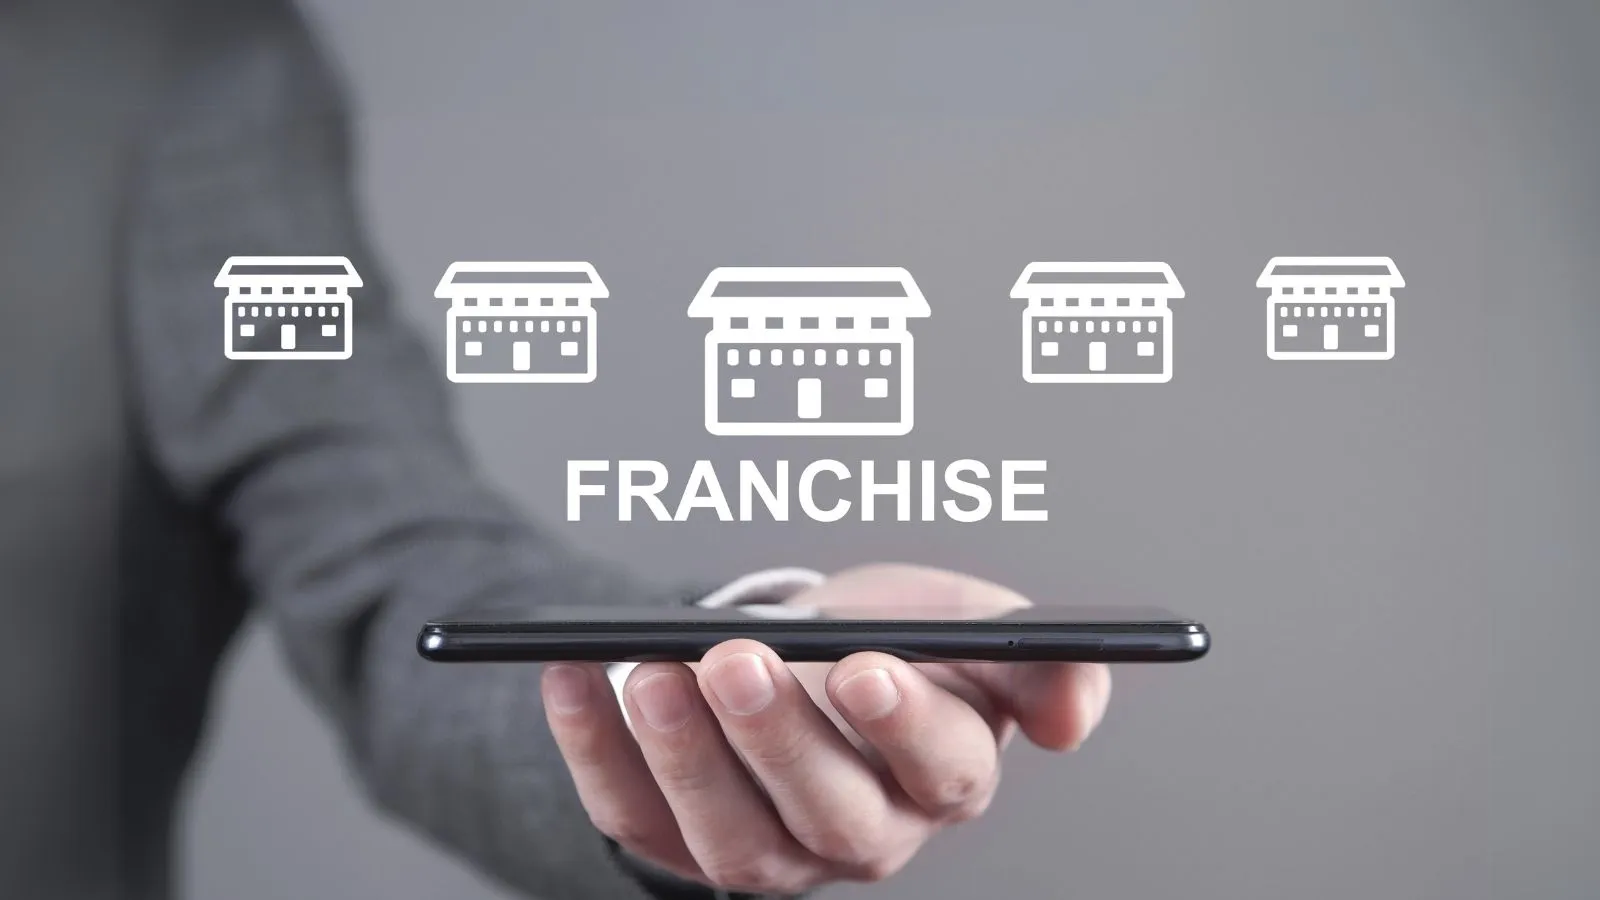 Pricing-at-the-heart-of-challenges-for-franchisees